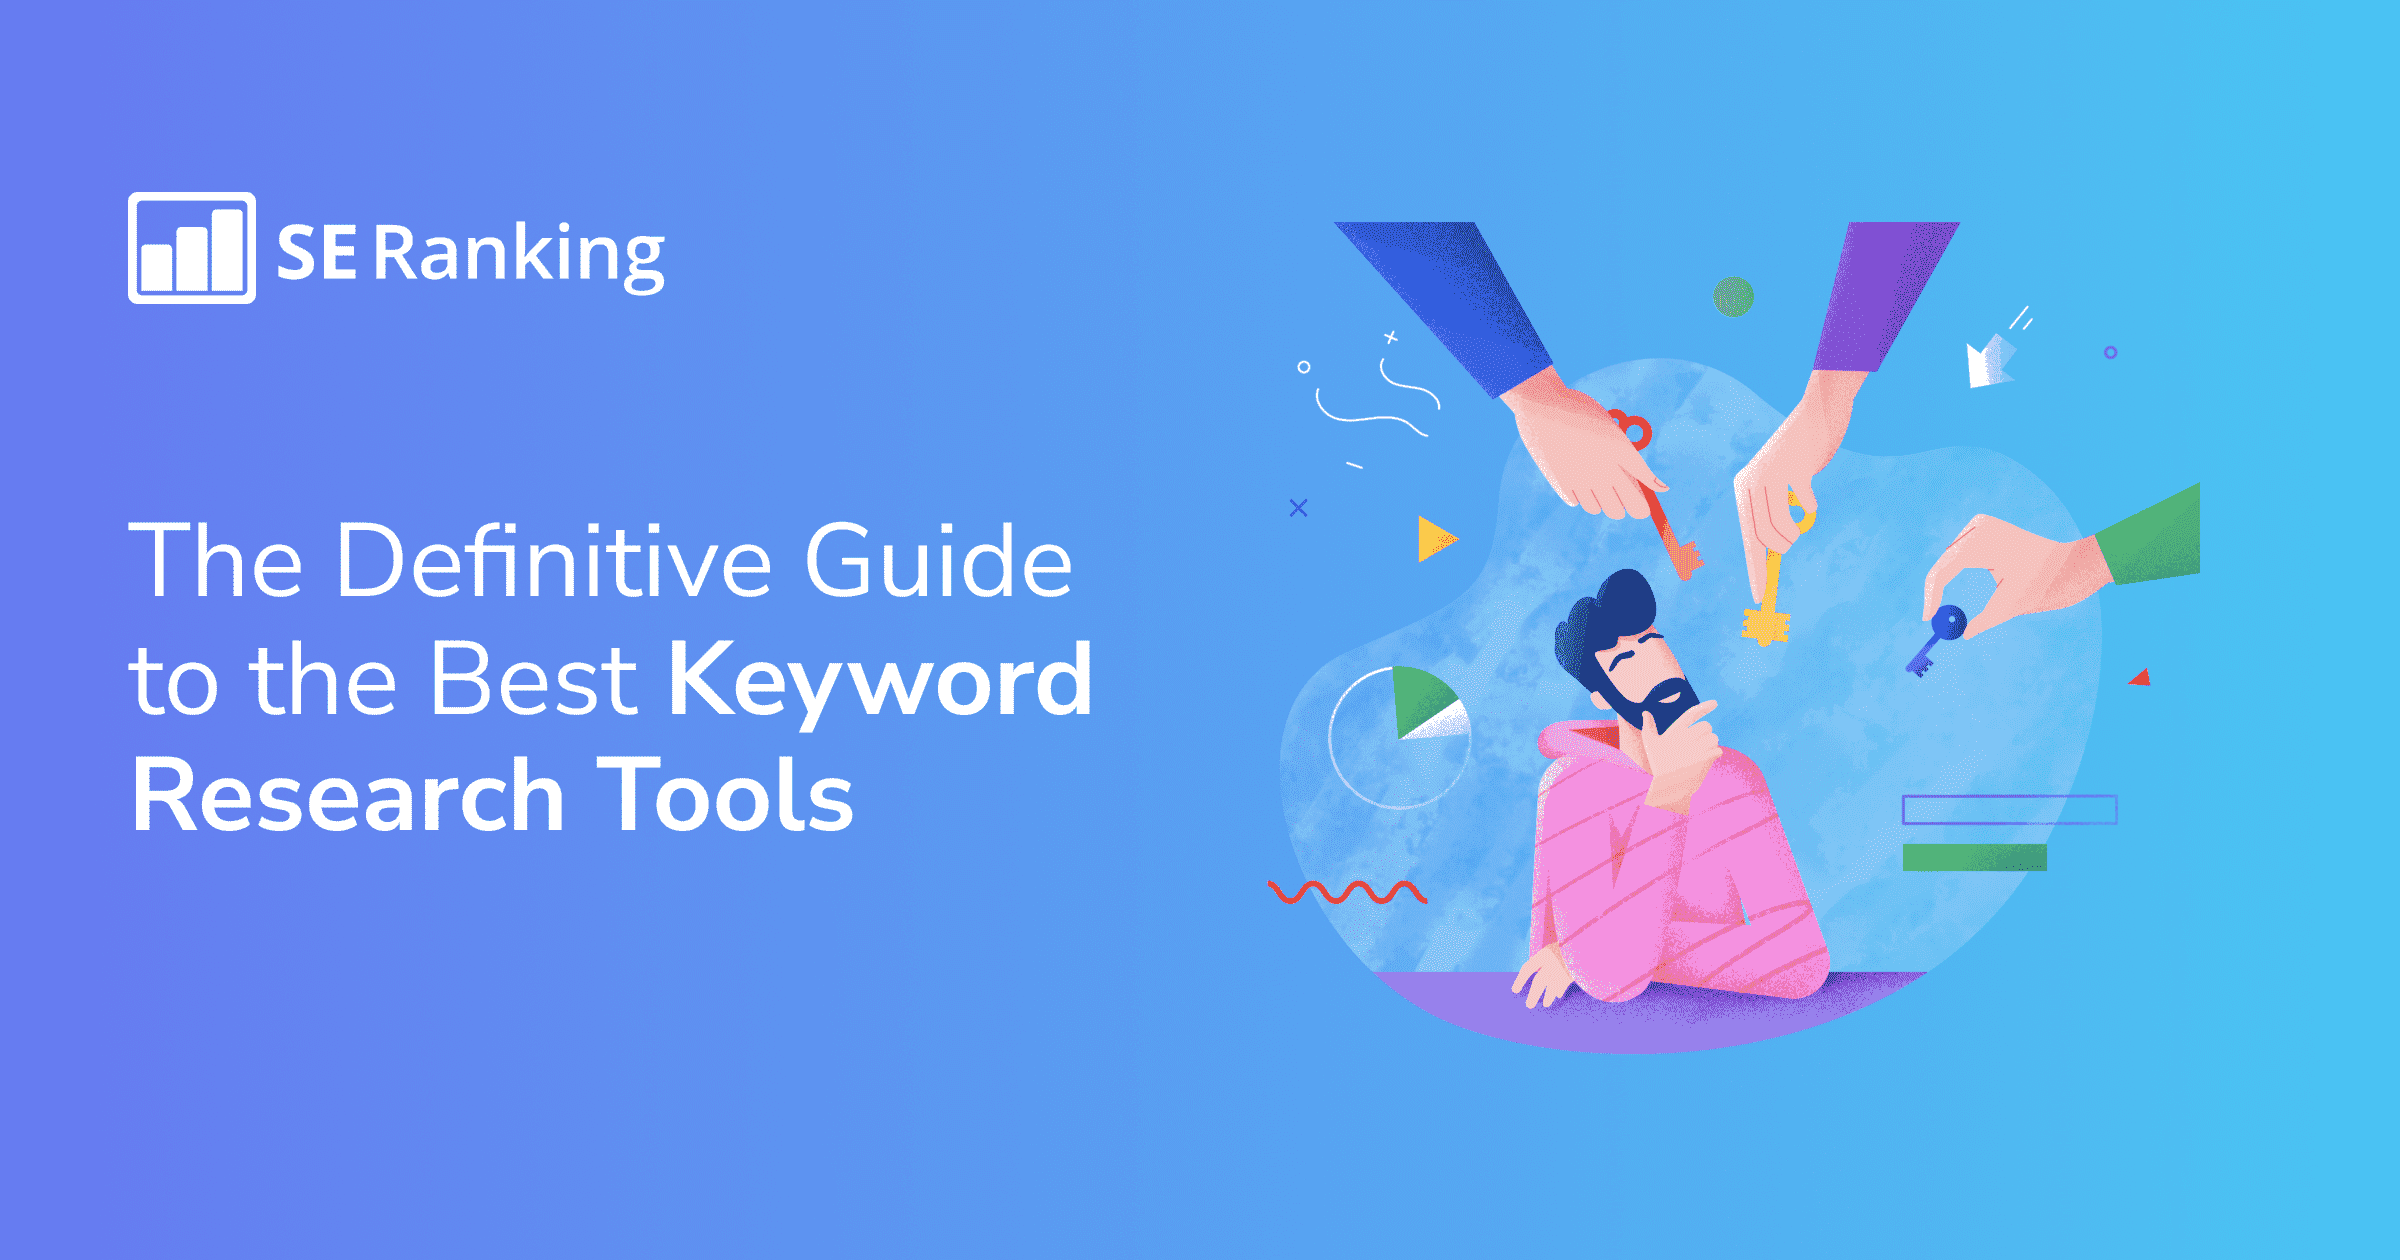 8 Best Keyword Research Tools: Main Features and Pricing